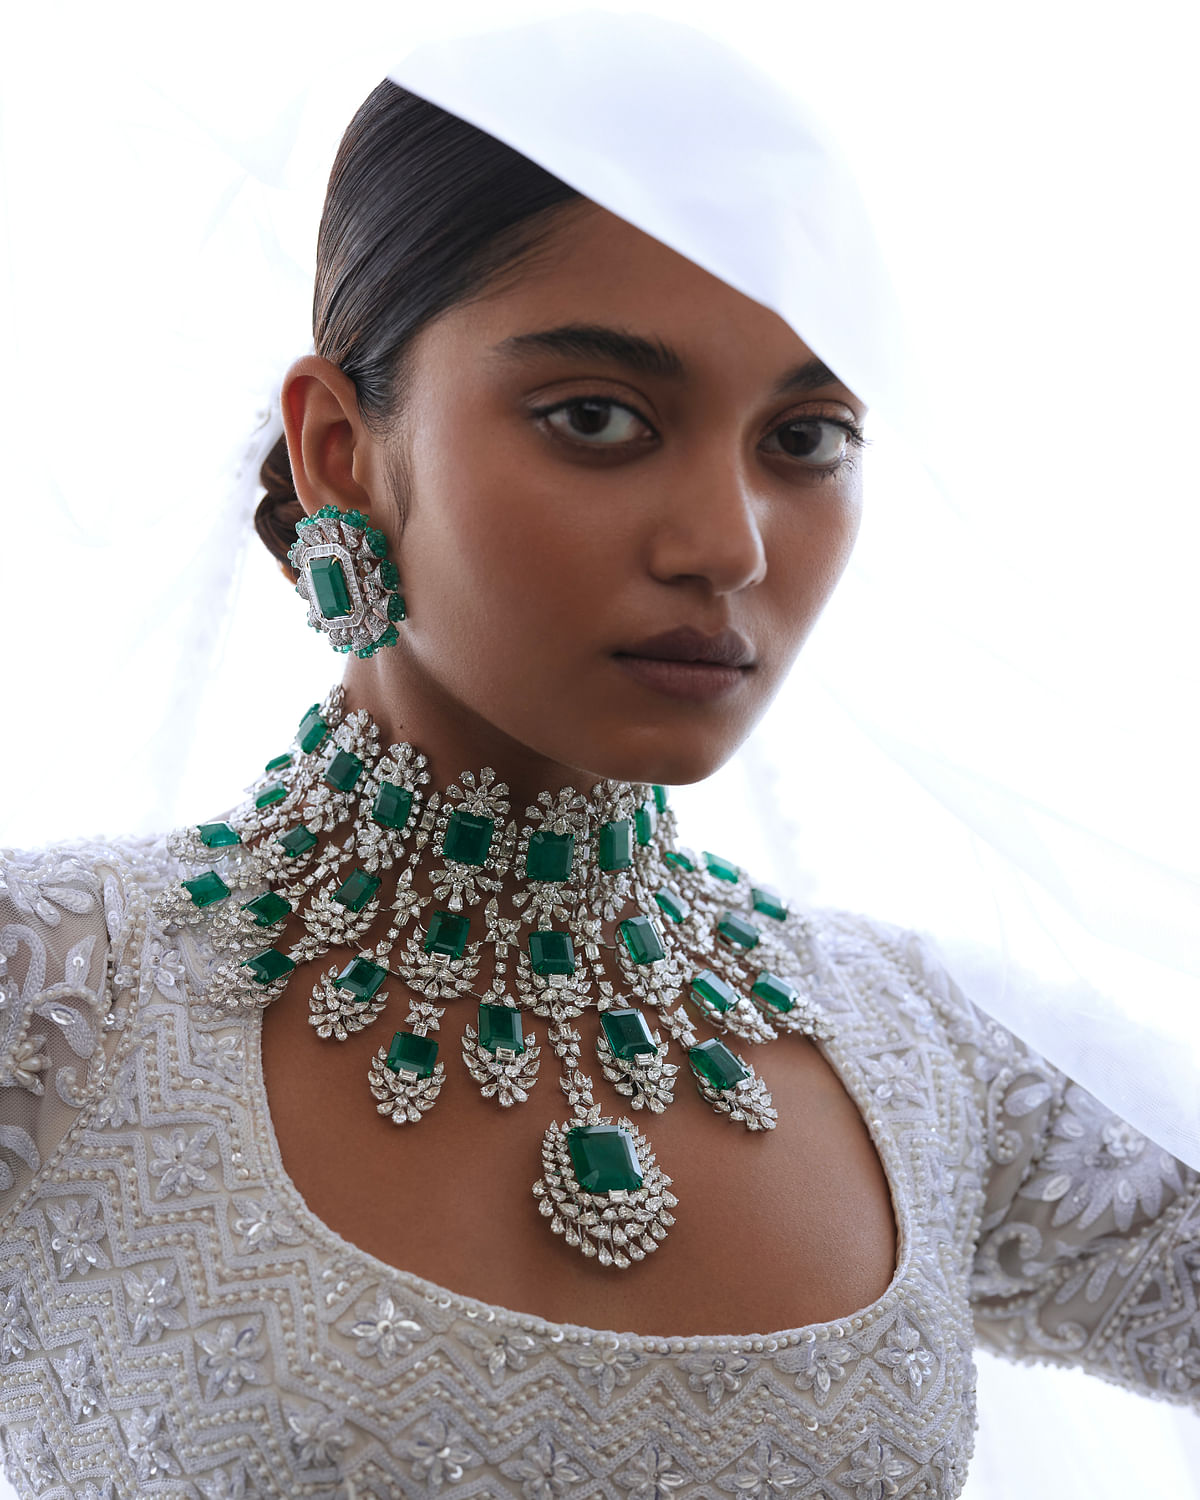 Manish Malhotra's foray in high jewellery with his exceptional line has transformed the India's bridal landscape